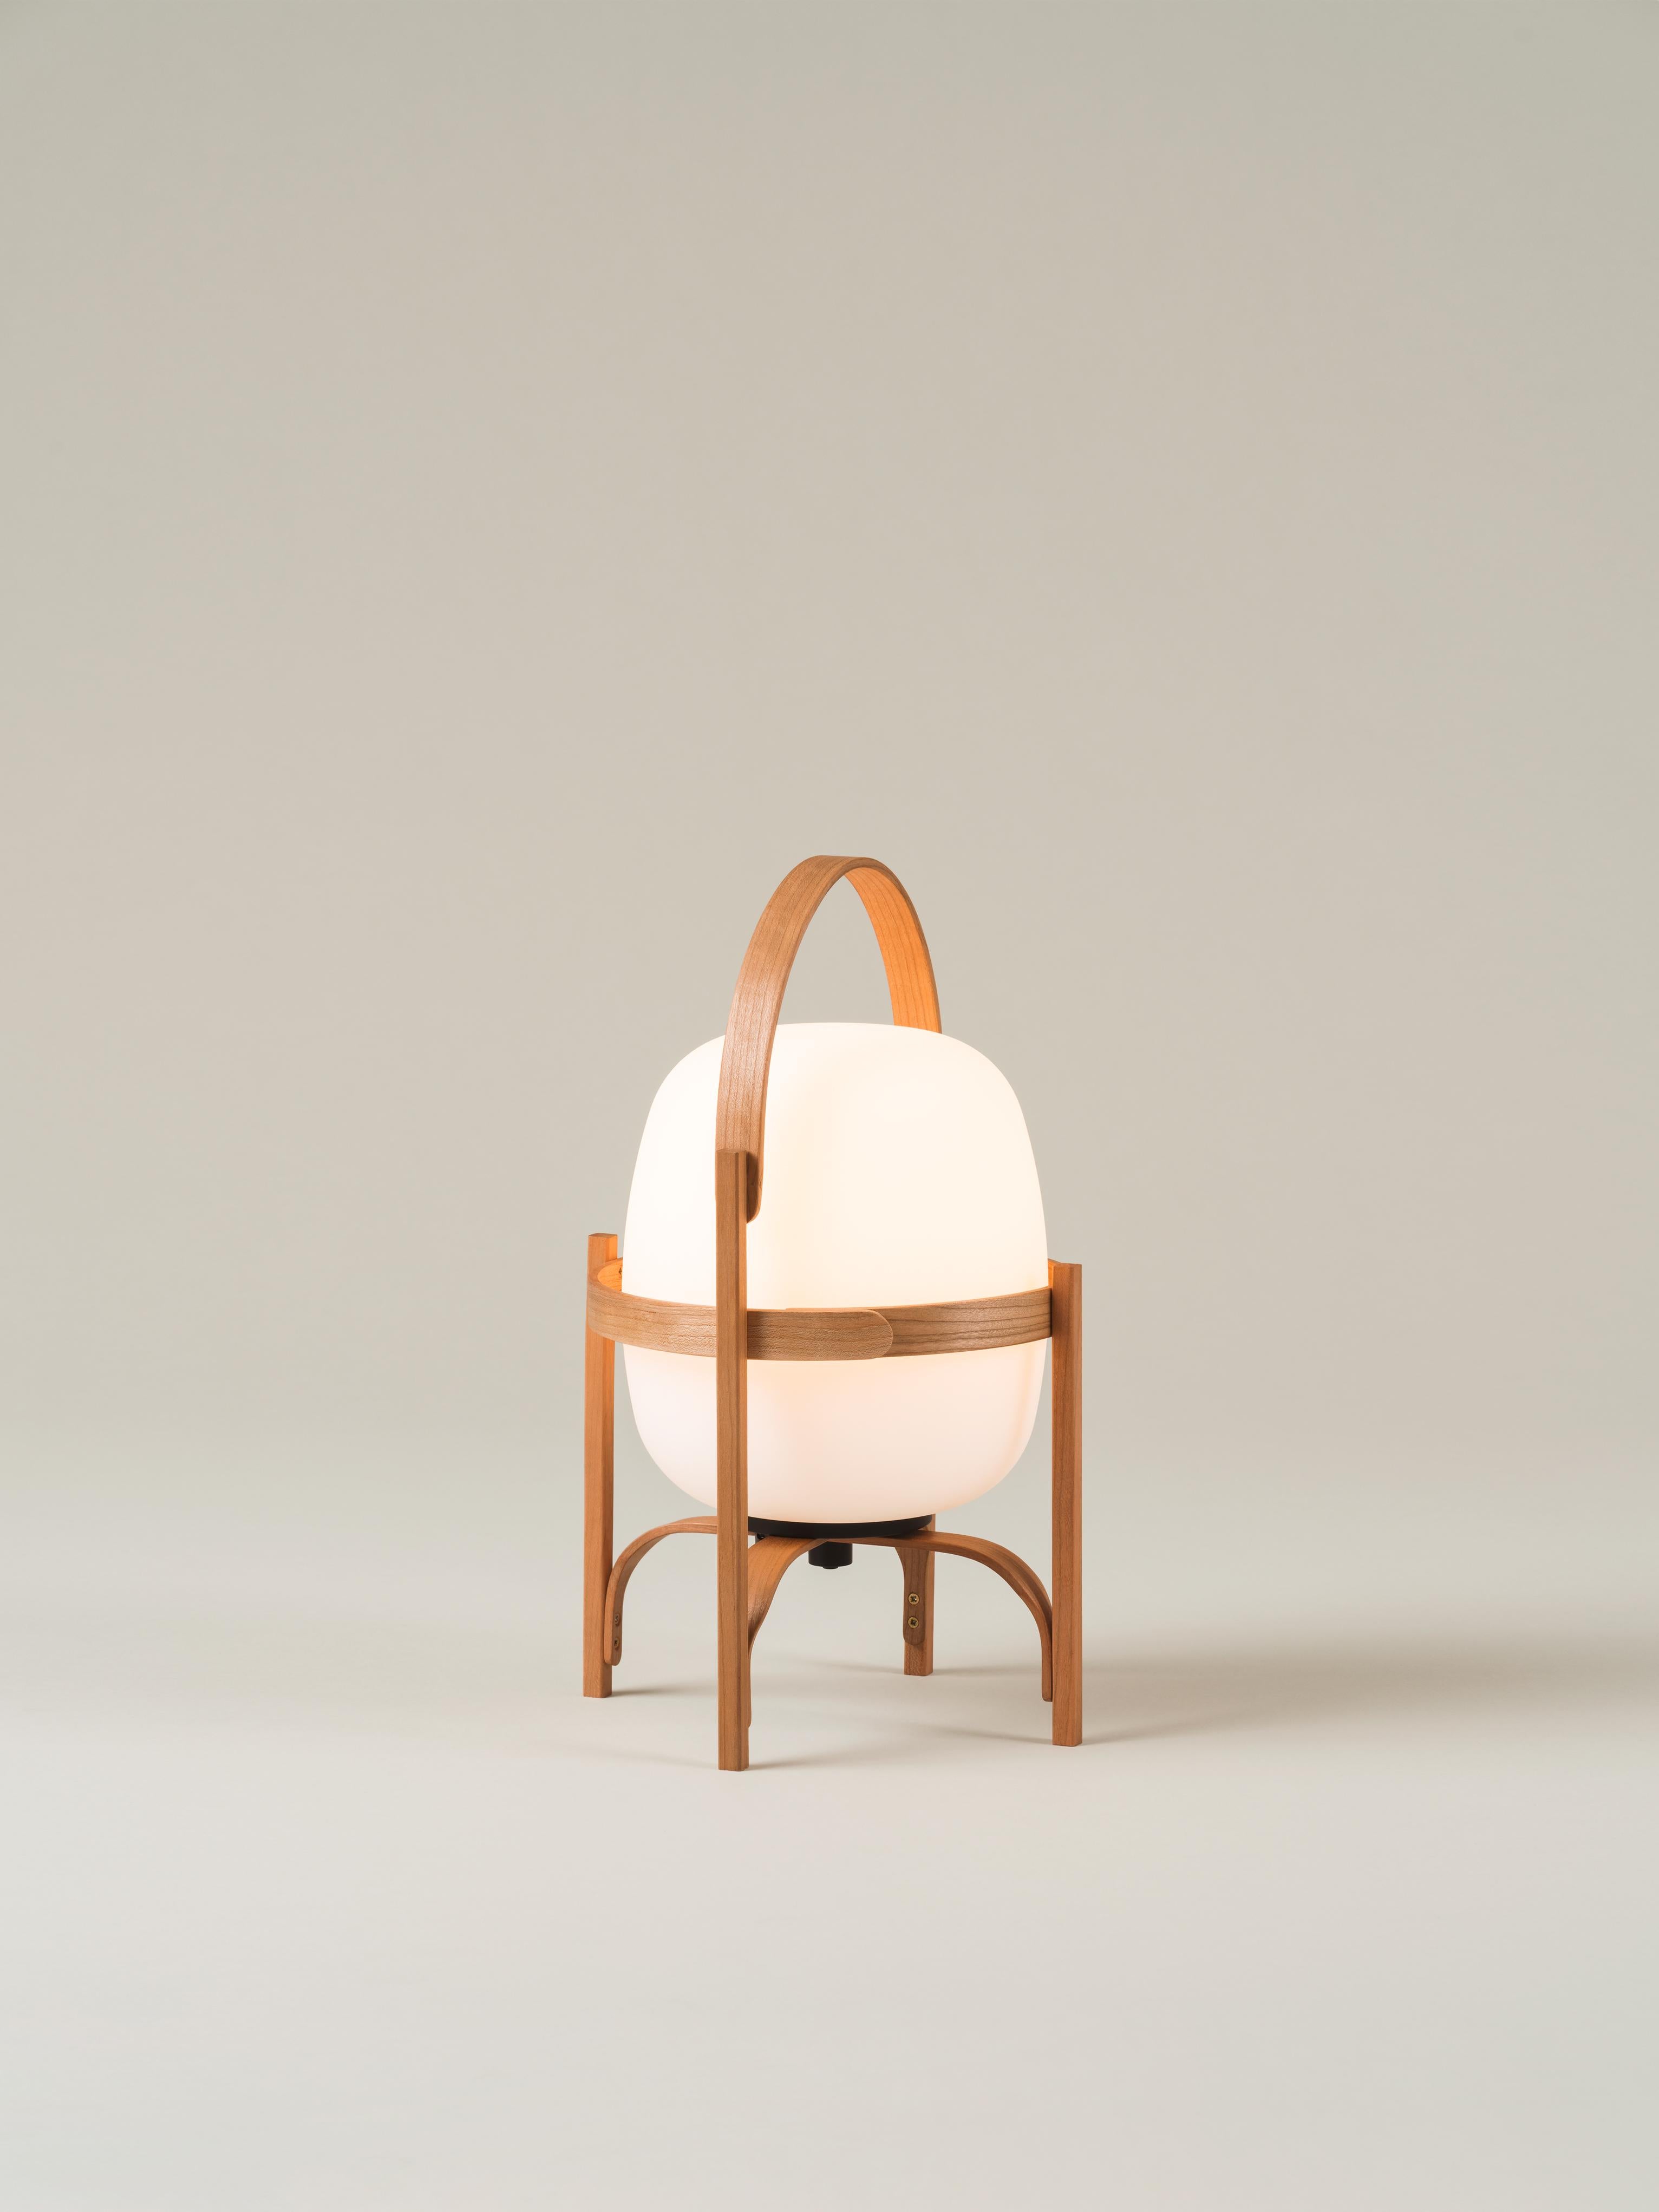 Cestita batería table lamp by Miguel Milá
Dimensions: D 22 x H 36 cm
Materials: Cherry wood, glass.
Available in polyethylene and glass shade.

A cordless, portable version, Cestita Batería is a lantern that creates an ambience of pleasure